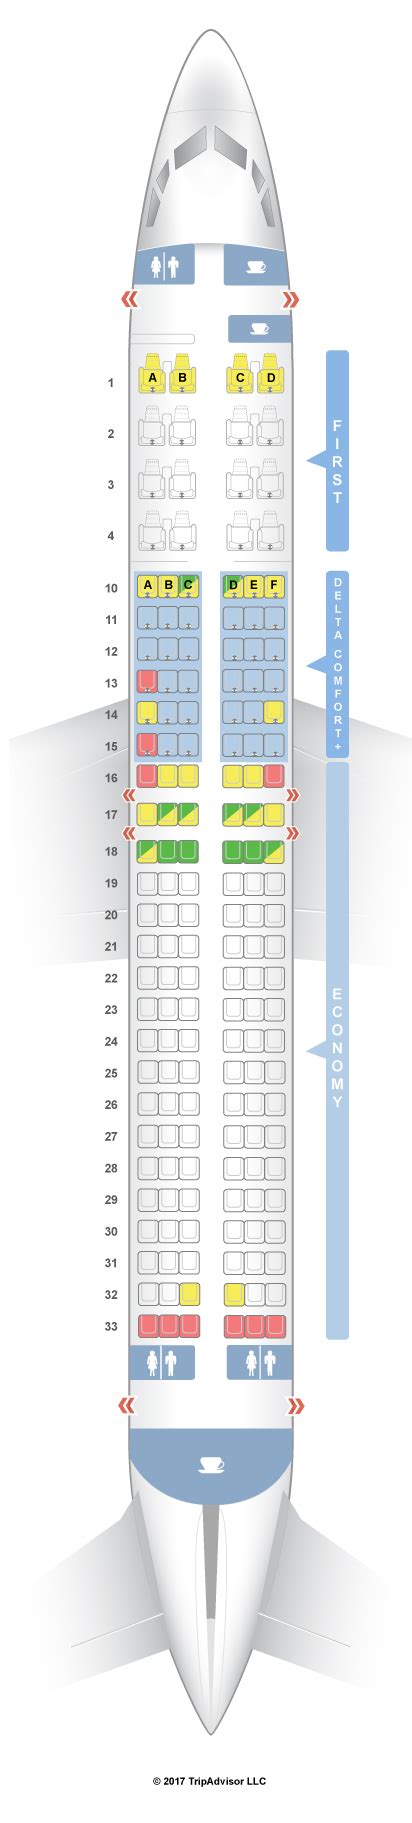 Delta One class includes 26 flat bed seats. The seats of the 1st row are located close to the galley and lavatories and this fact may bother passengers of these seats. Delta Comfort+ has 29 seats. The best seats in this section are the seats of the 13th row. Passengers of these seats will feel comfortable thanks to extra legroom.